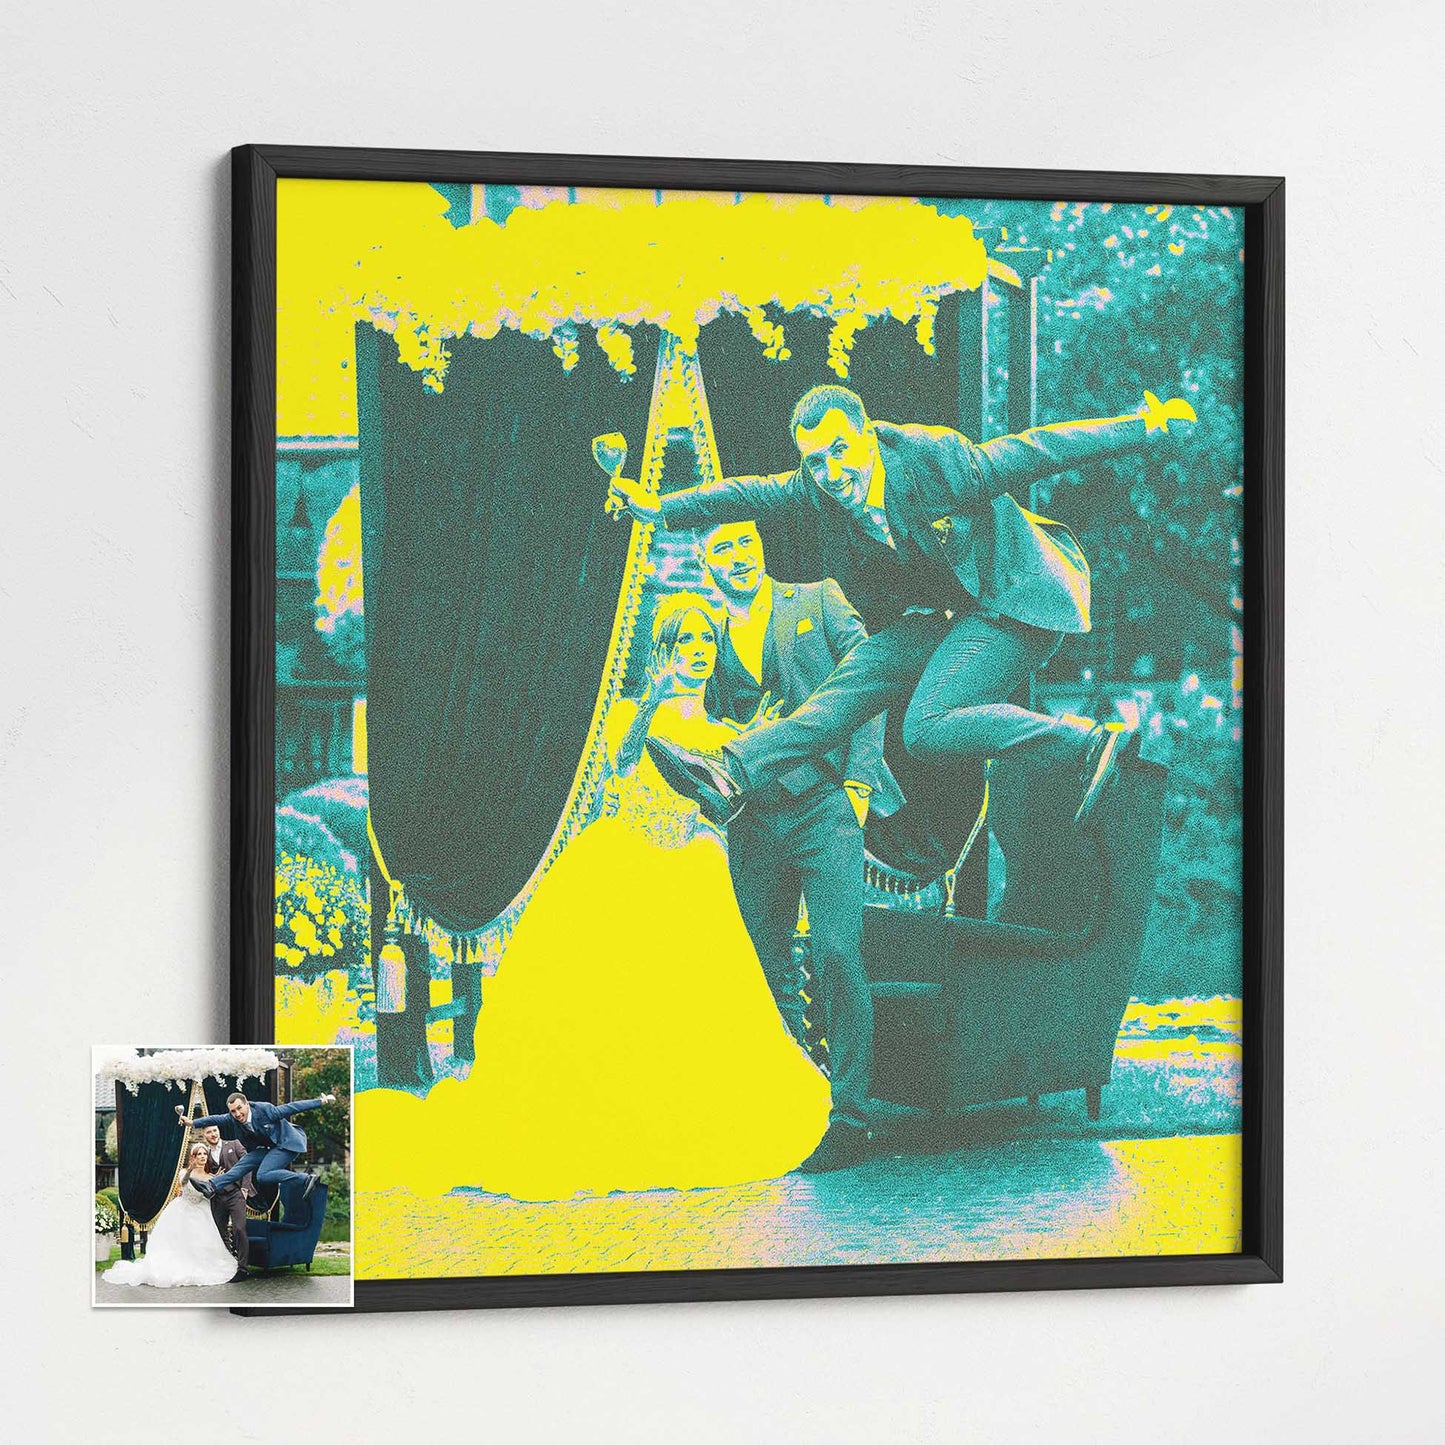 Elevate your interior design with the vibrant and bright Personalised Acid Yellow Framed Print. Its vivid and colorful design adds a unique and creative flair to your home decor. Crafted with a wooden frame and printed on museum paper